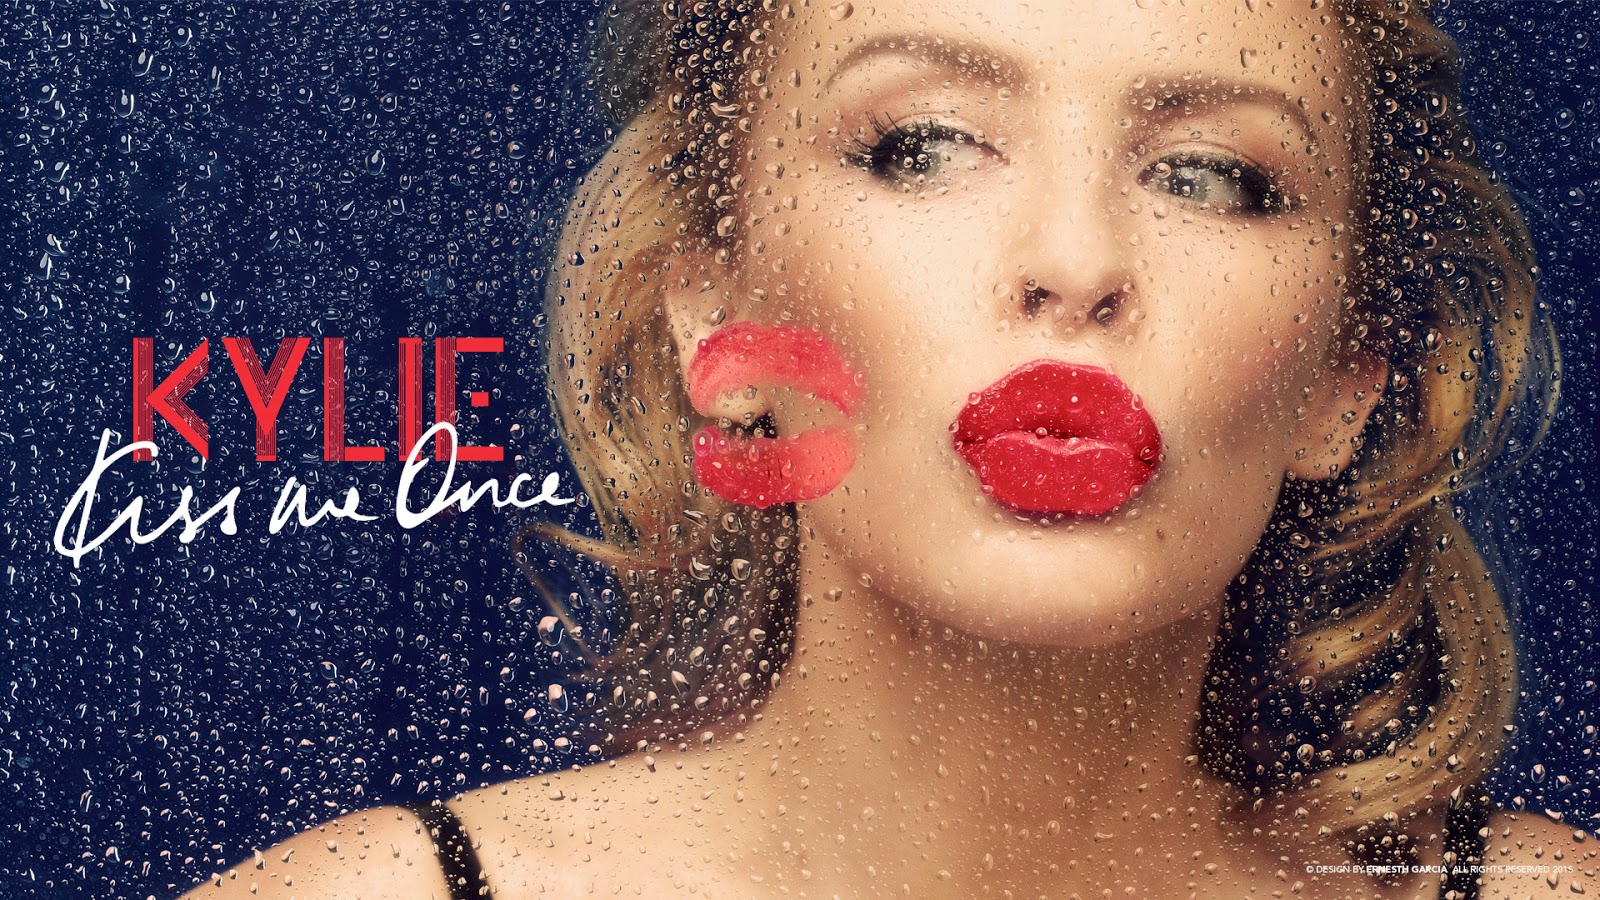 Kylie Minogue Kiss Me Once Photoshoot - HD Wallpaper 